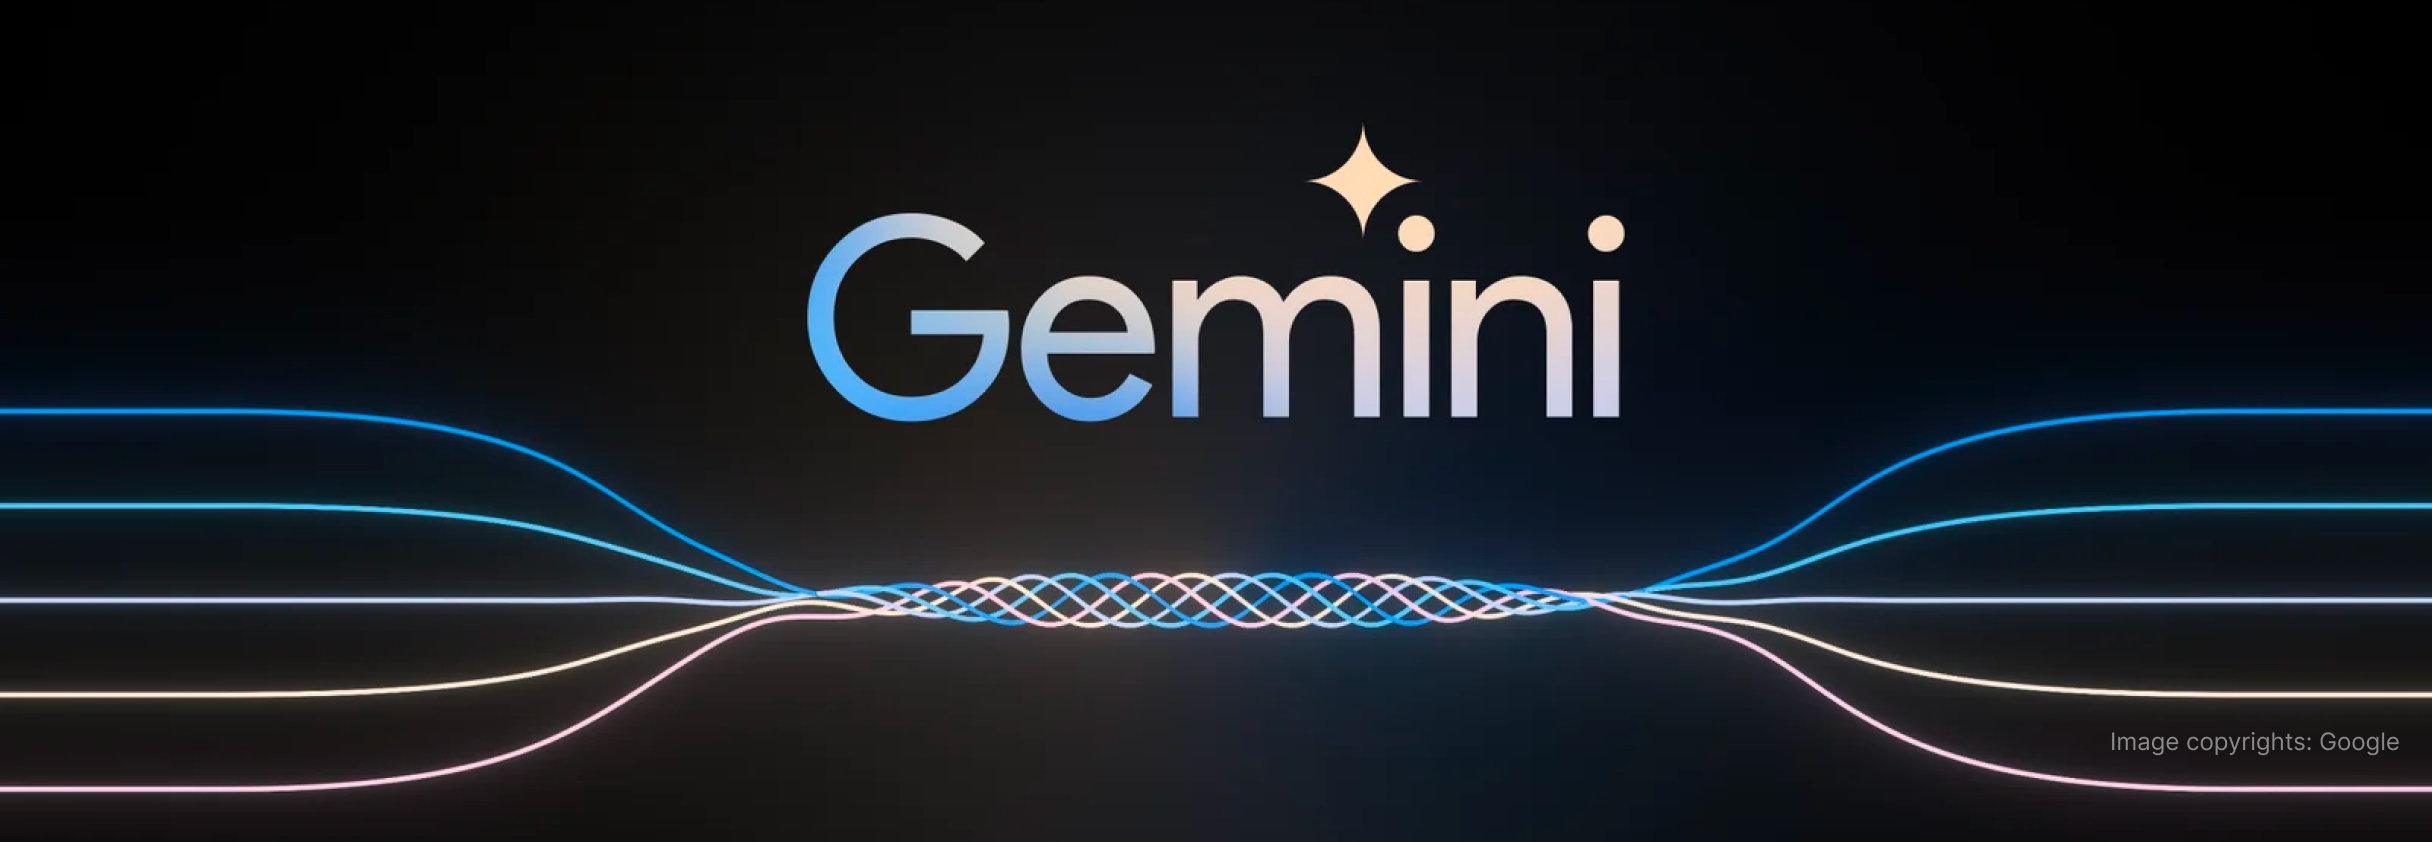 Gemini image copyrights are owned by Google